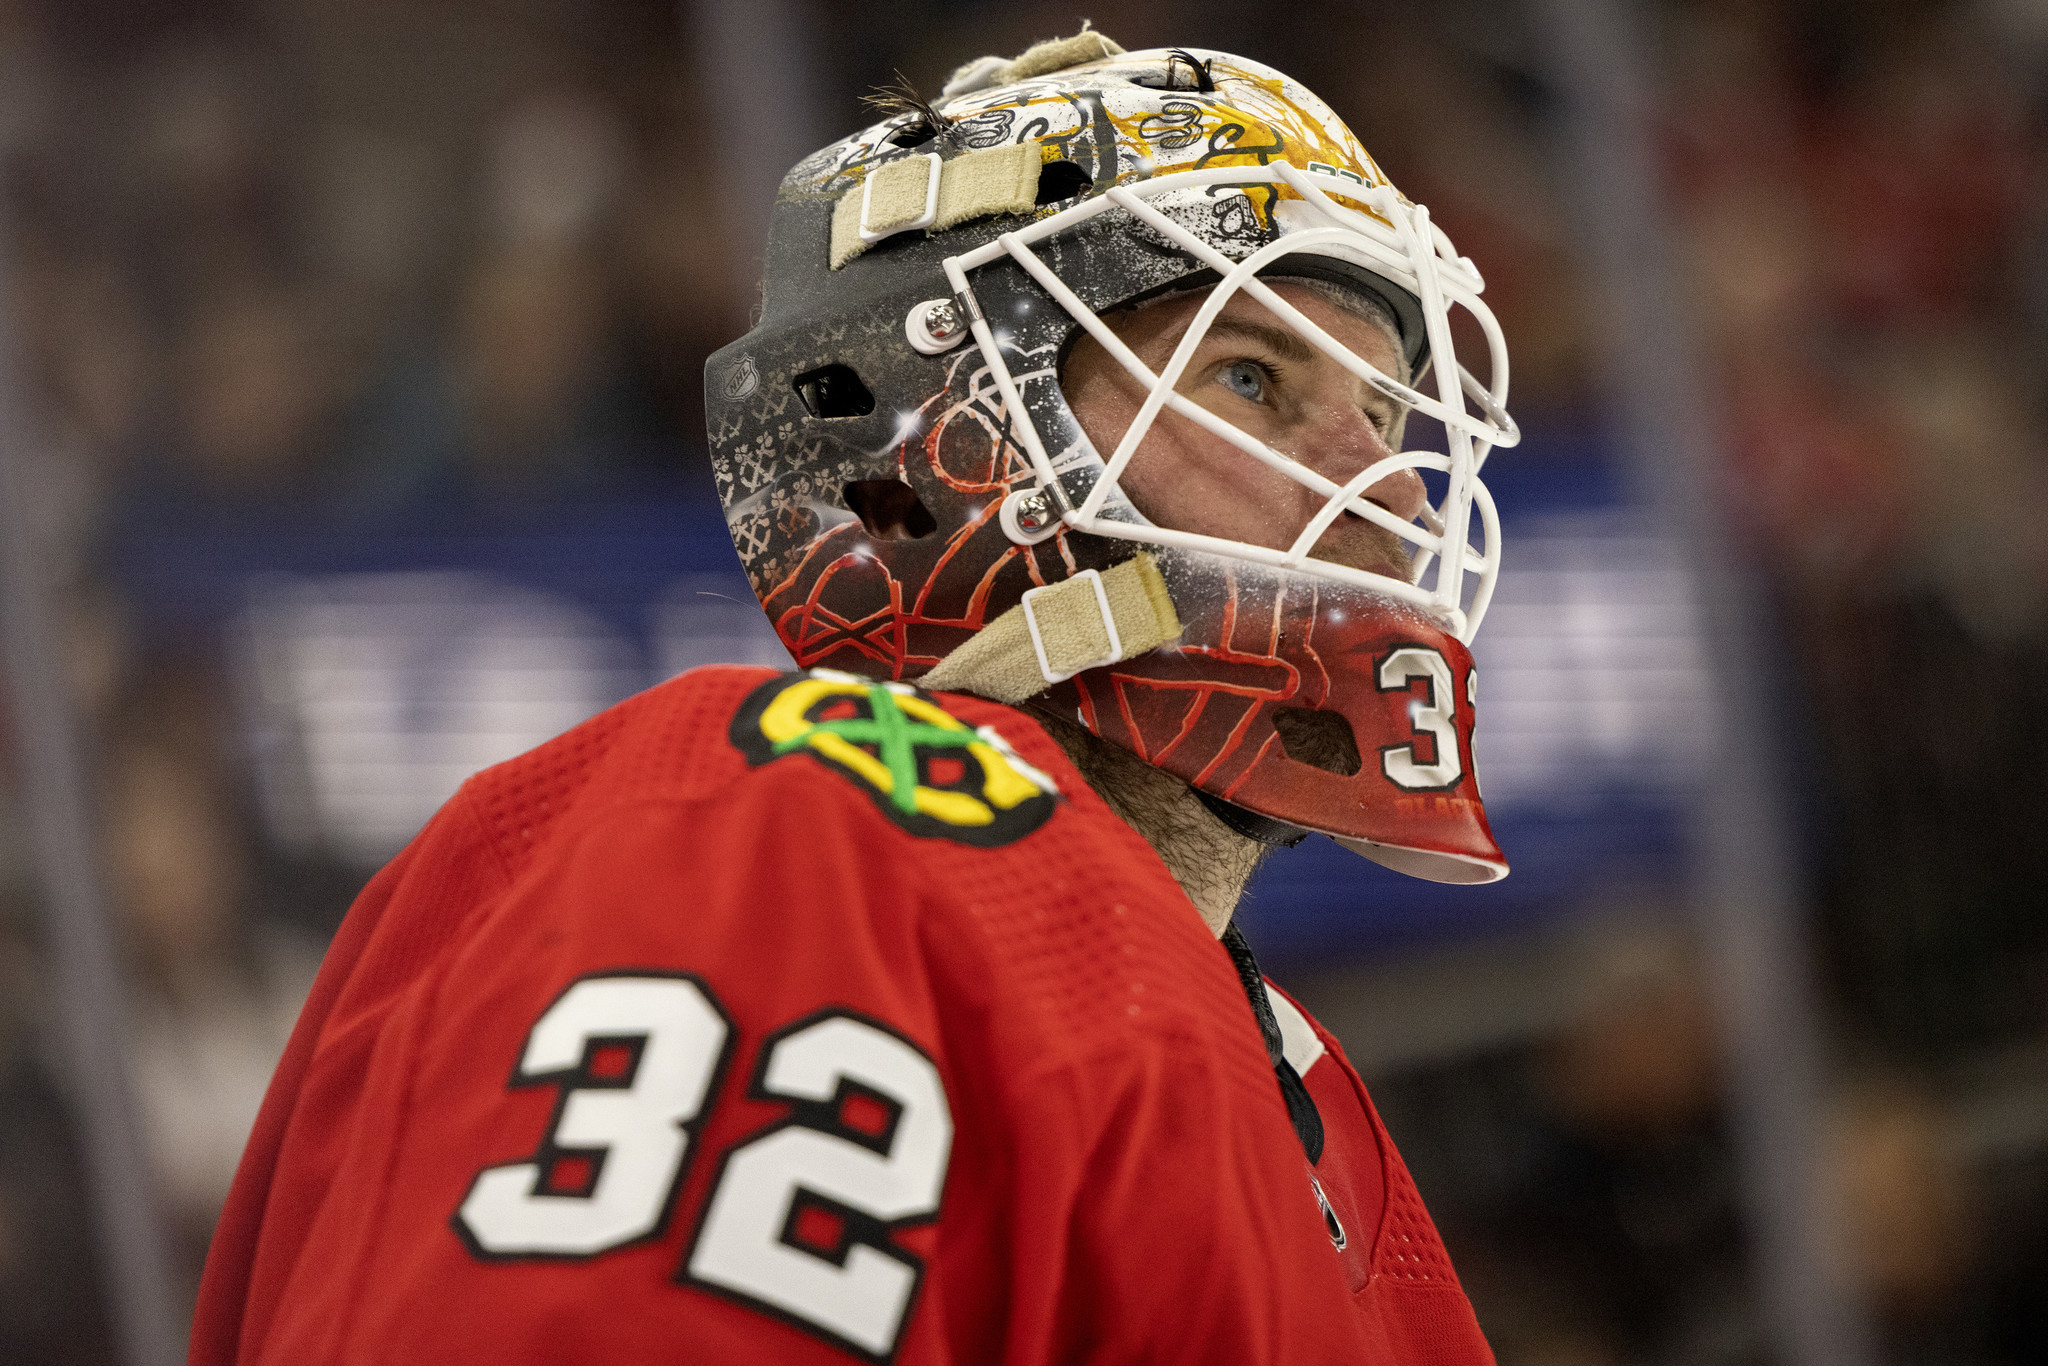 Former Seahawks Youth Goaltender Signs With Seahawks Eastern